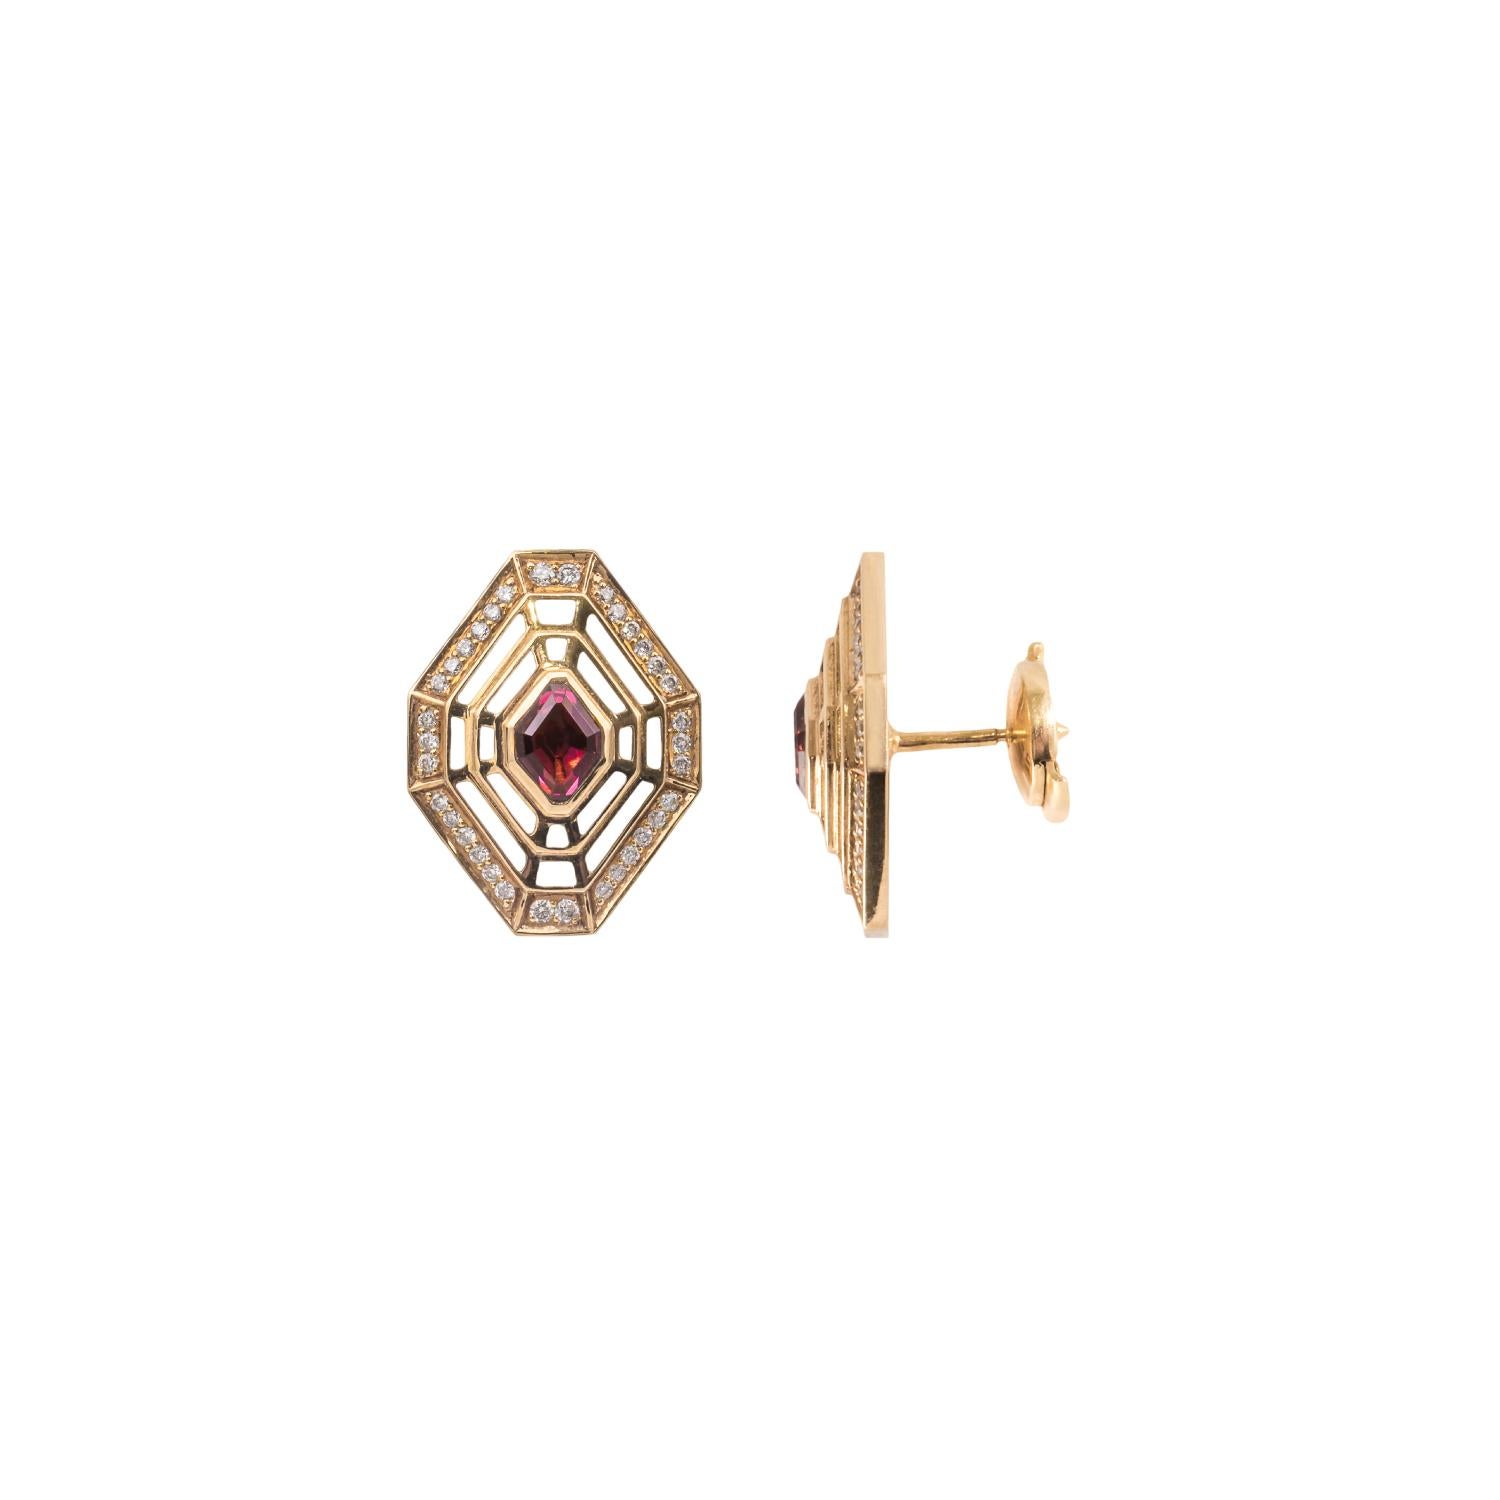 18 Carat Rose Gold Earrings with Rhodolites and Diamonds.HAND CARVED STONES made from a specific unique designed. HANDCRAFTED IN FRANCE.
The Designer, Bénédicte, decided to Produce all her Creations in her country of origin, France, to Honor and